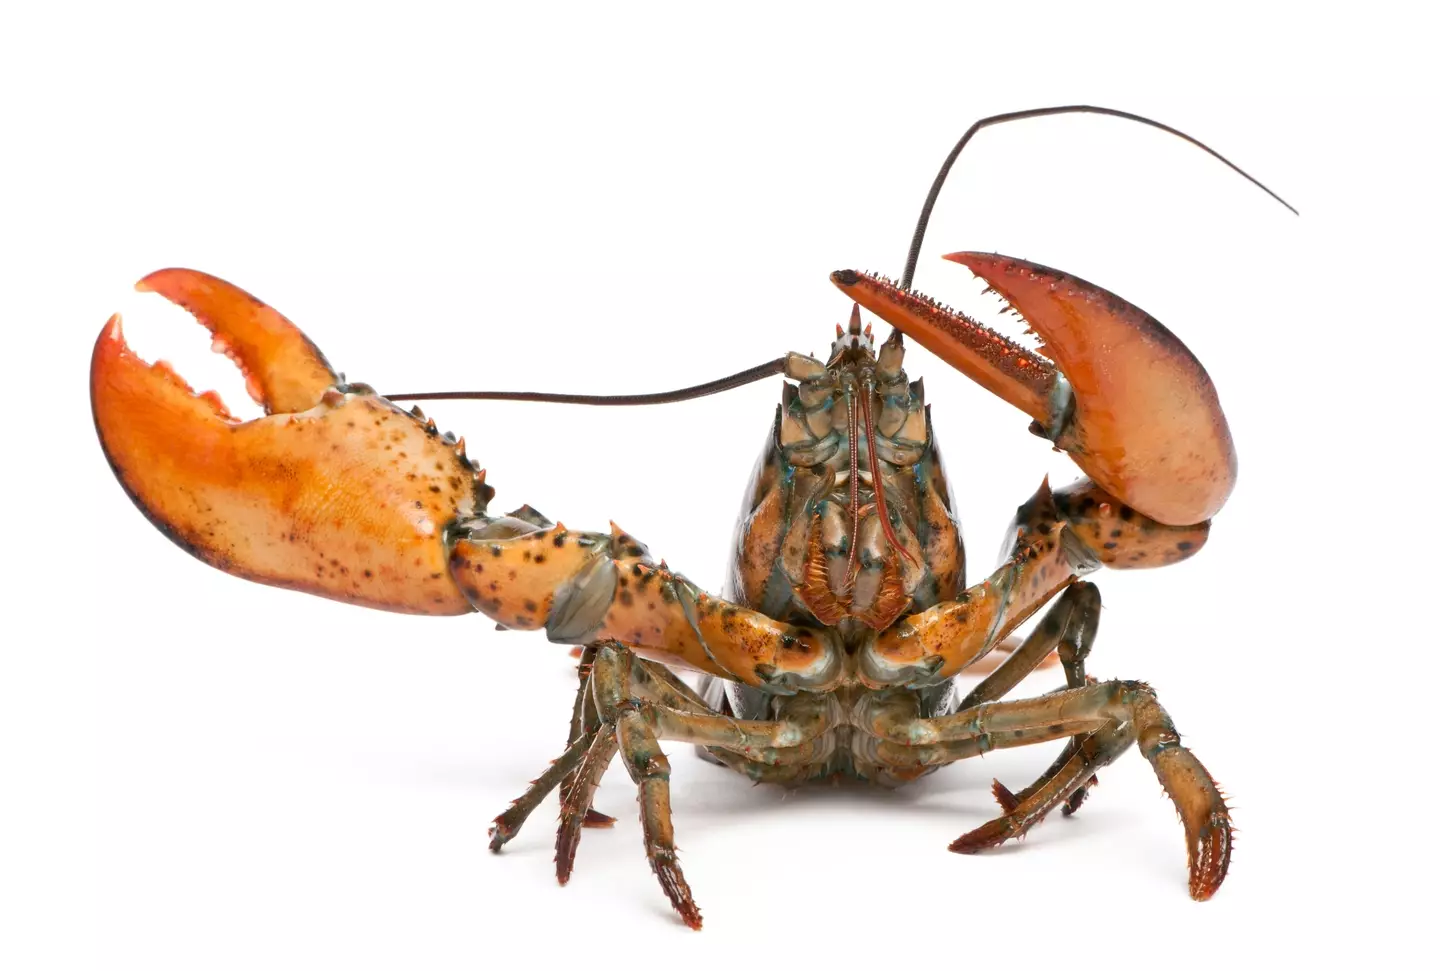 Lobsters will now be recognised as sentient beings in an upcoming bill (